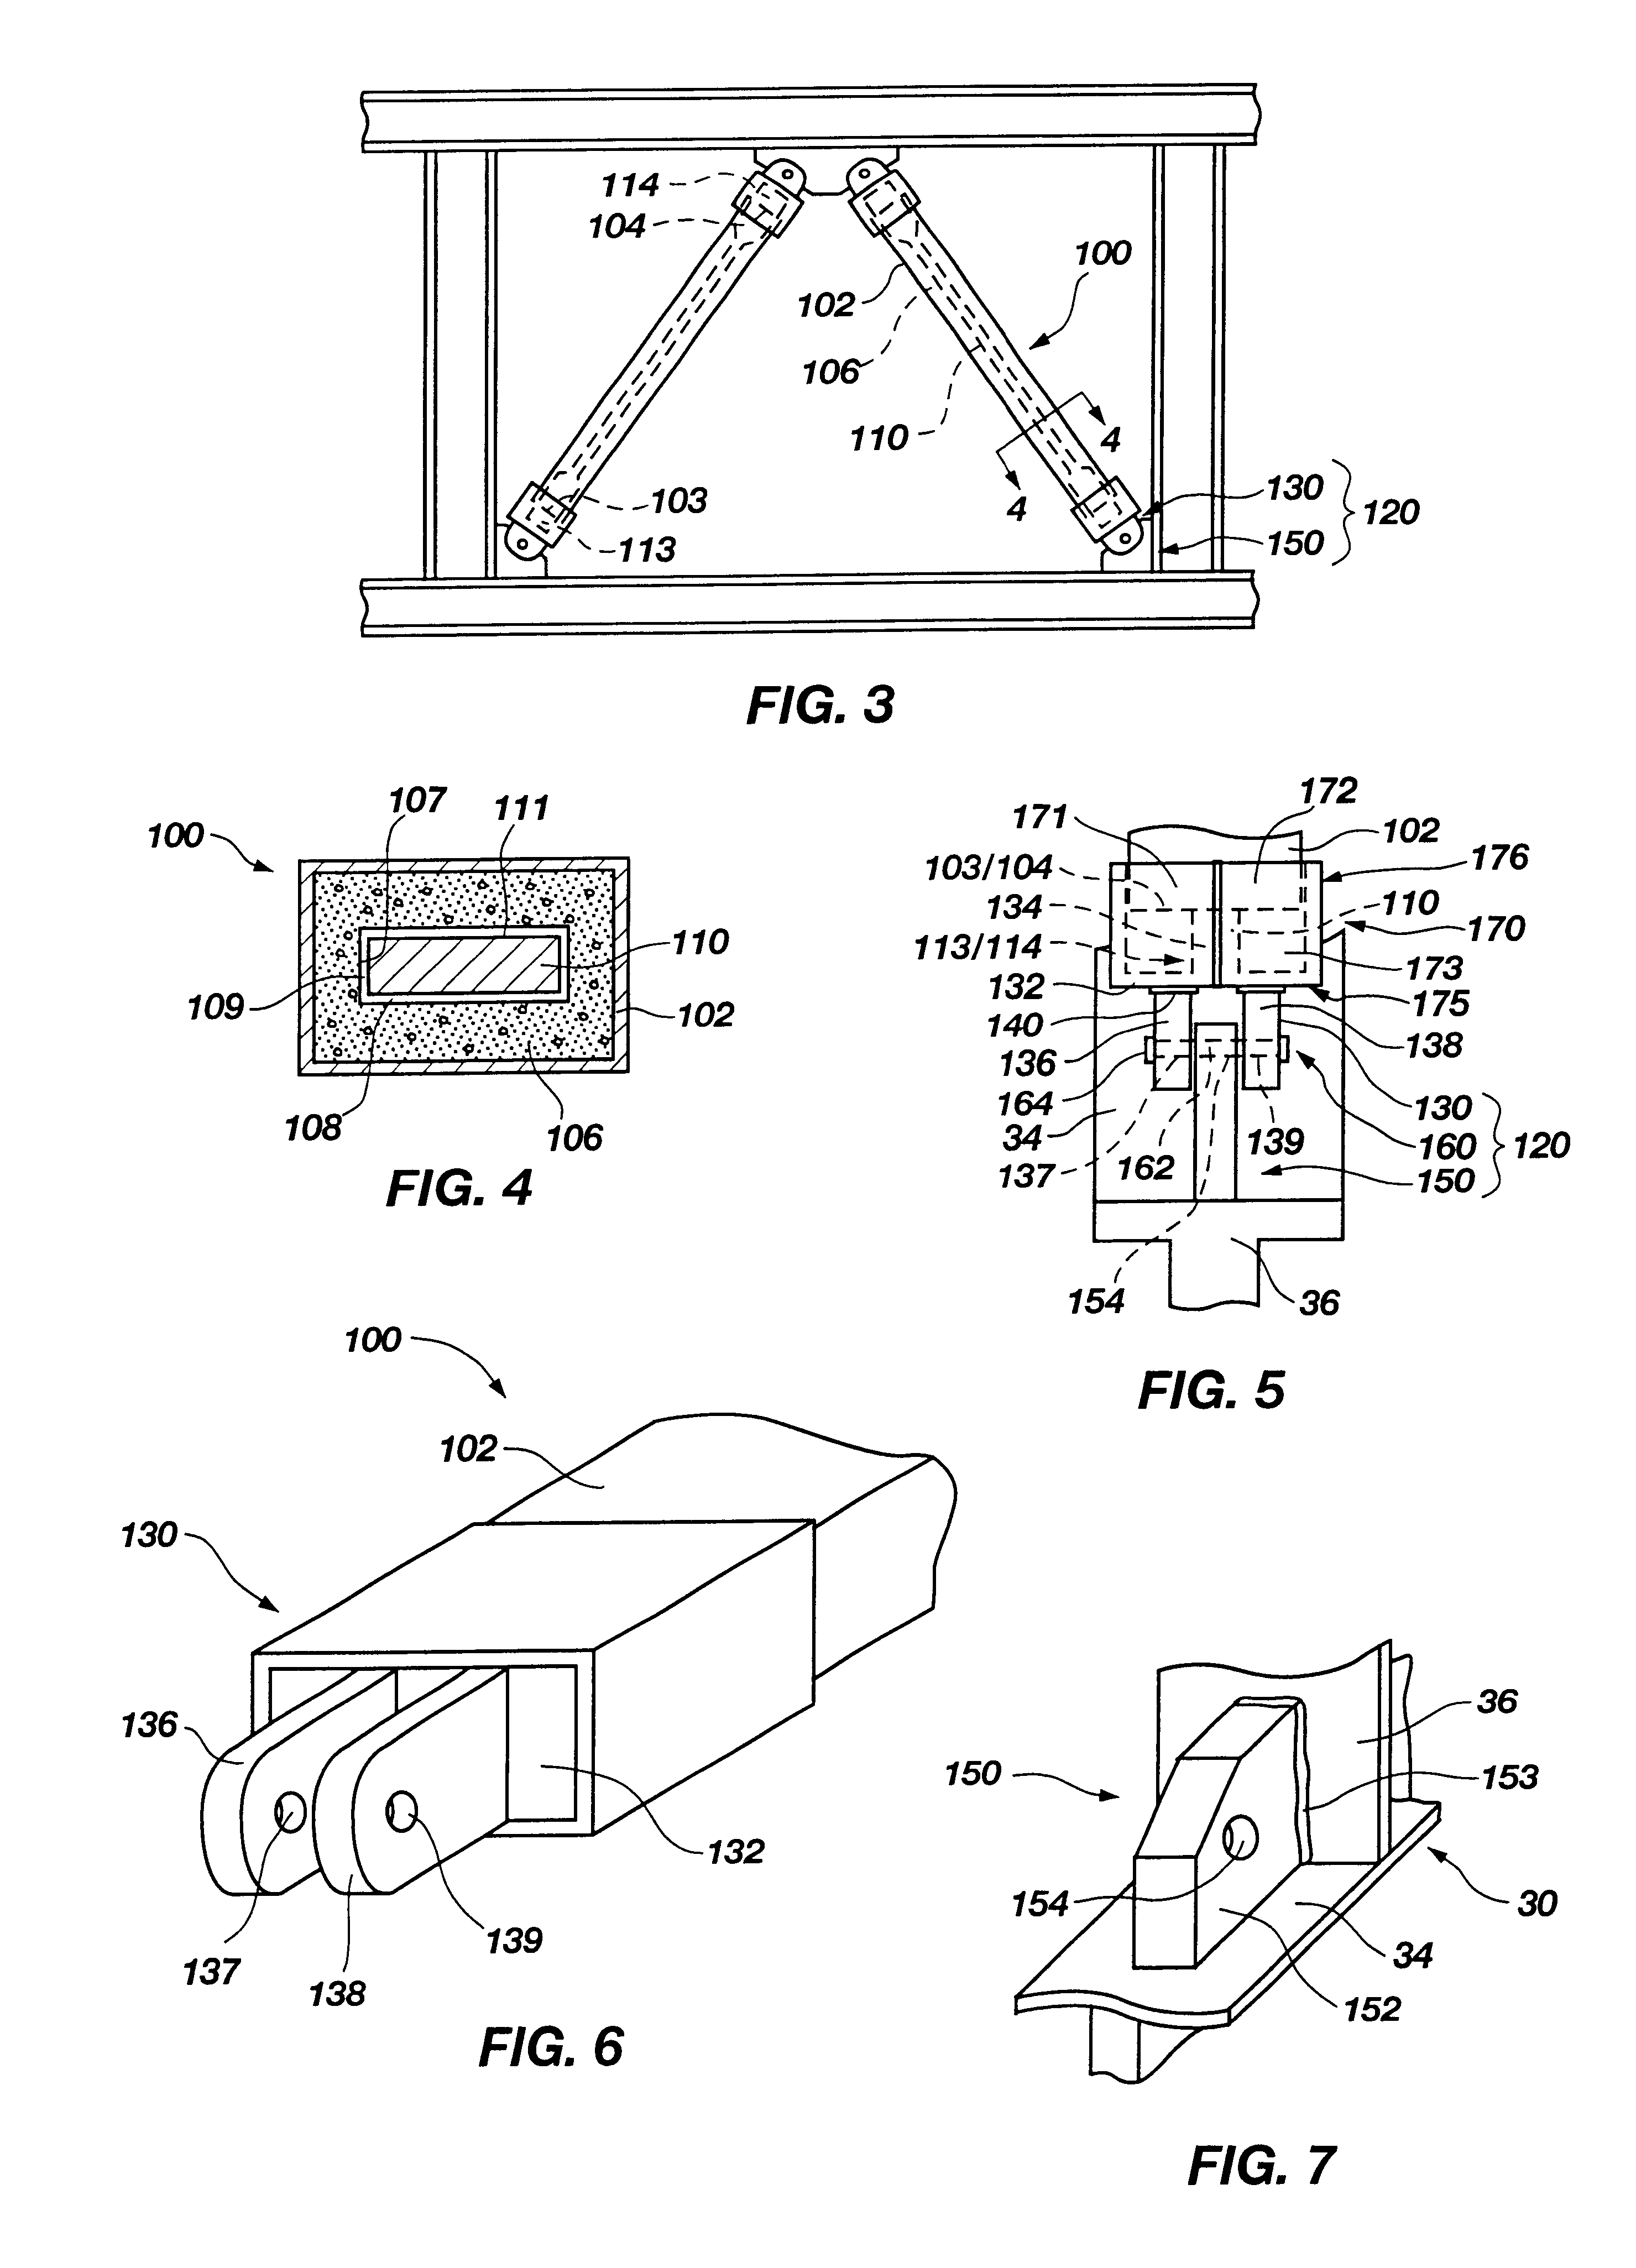 Pin and collar connection apparatus for use with seismic braces, seismic braces including the pin and collar connection, and methods